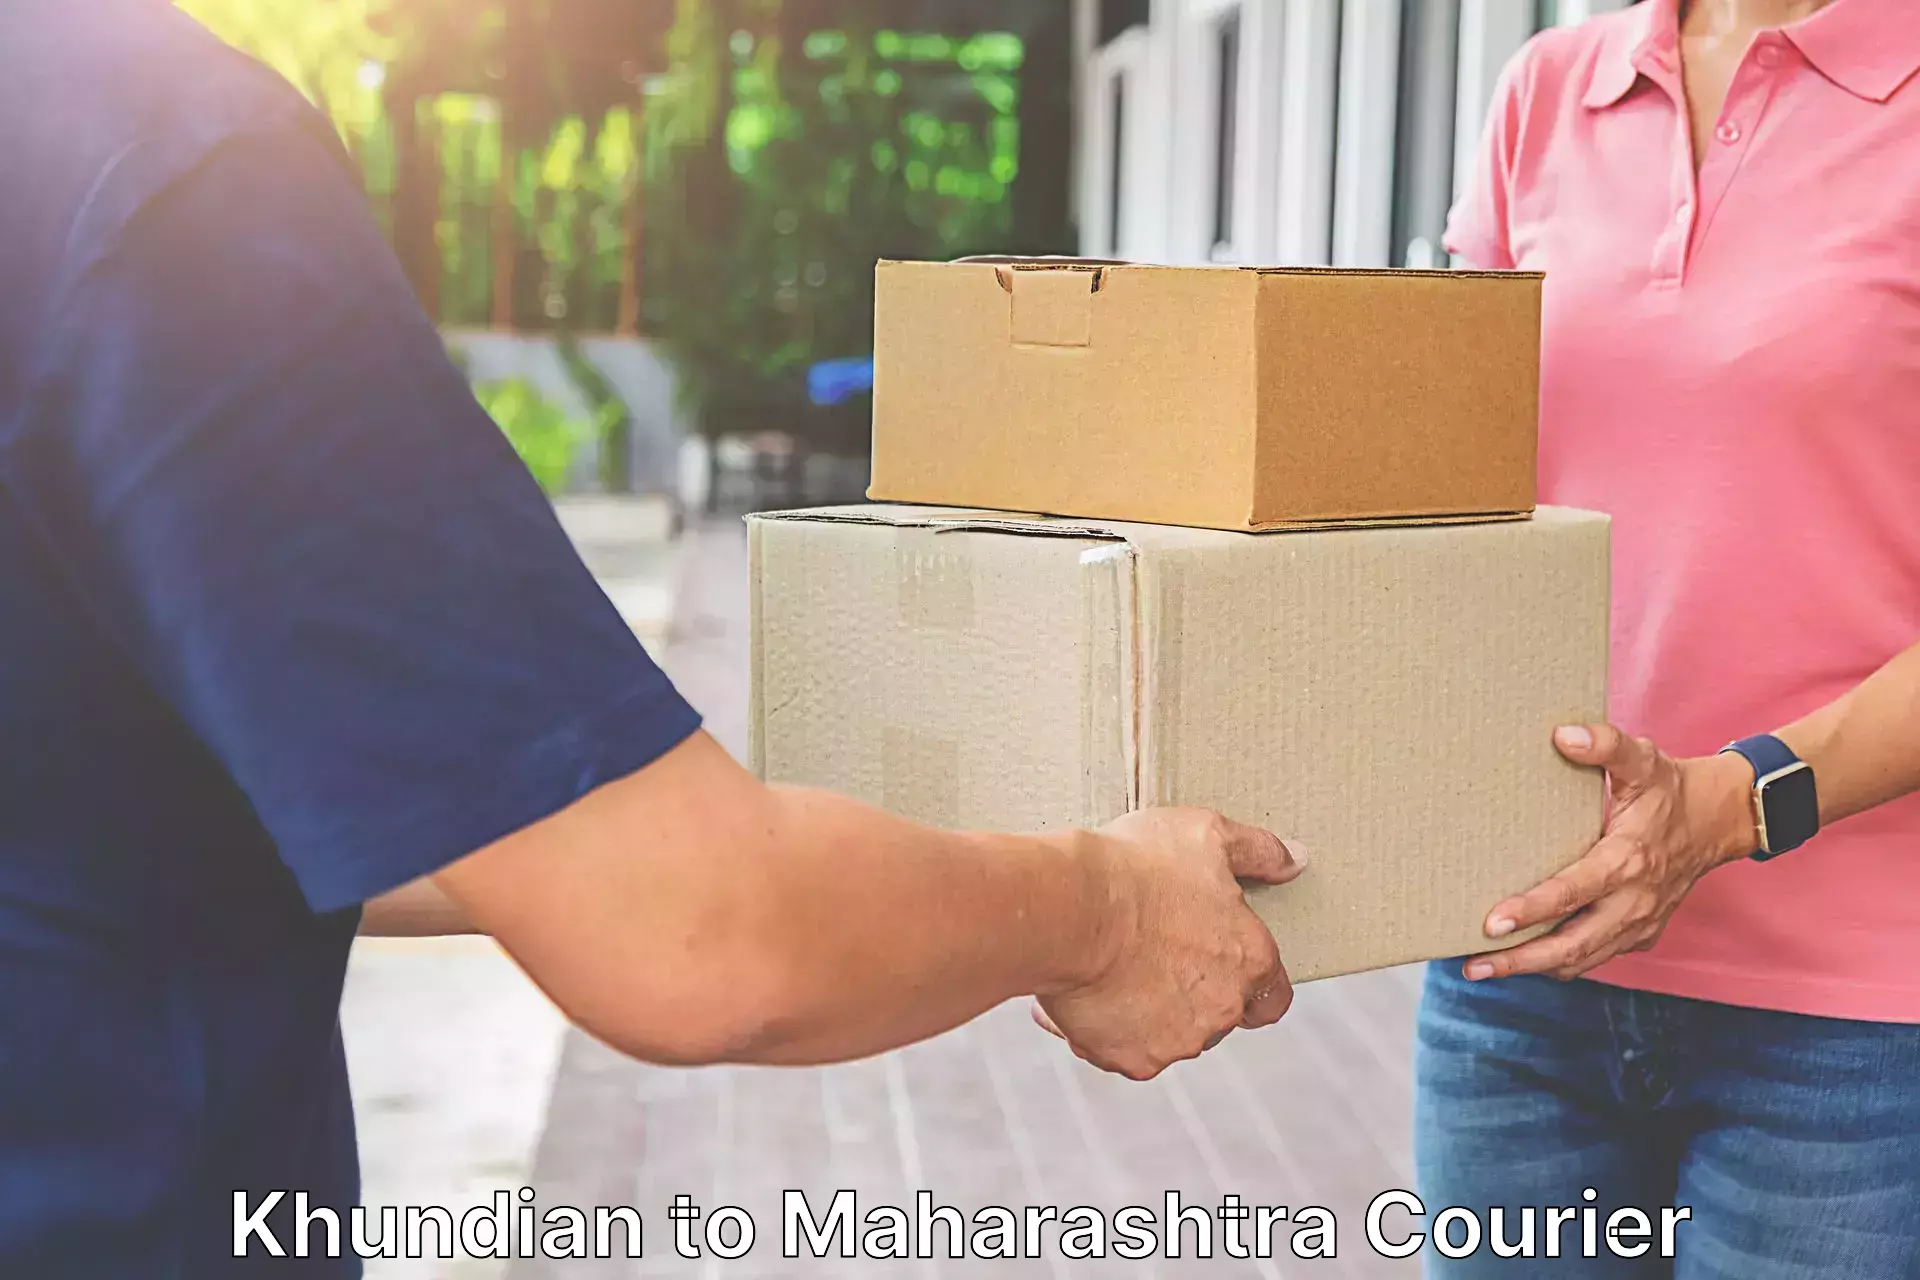 Online package tracking Khundian to Talere